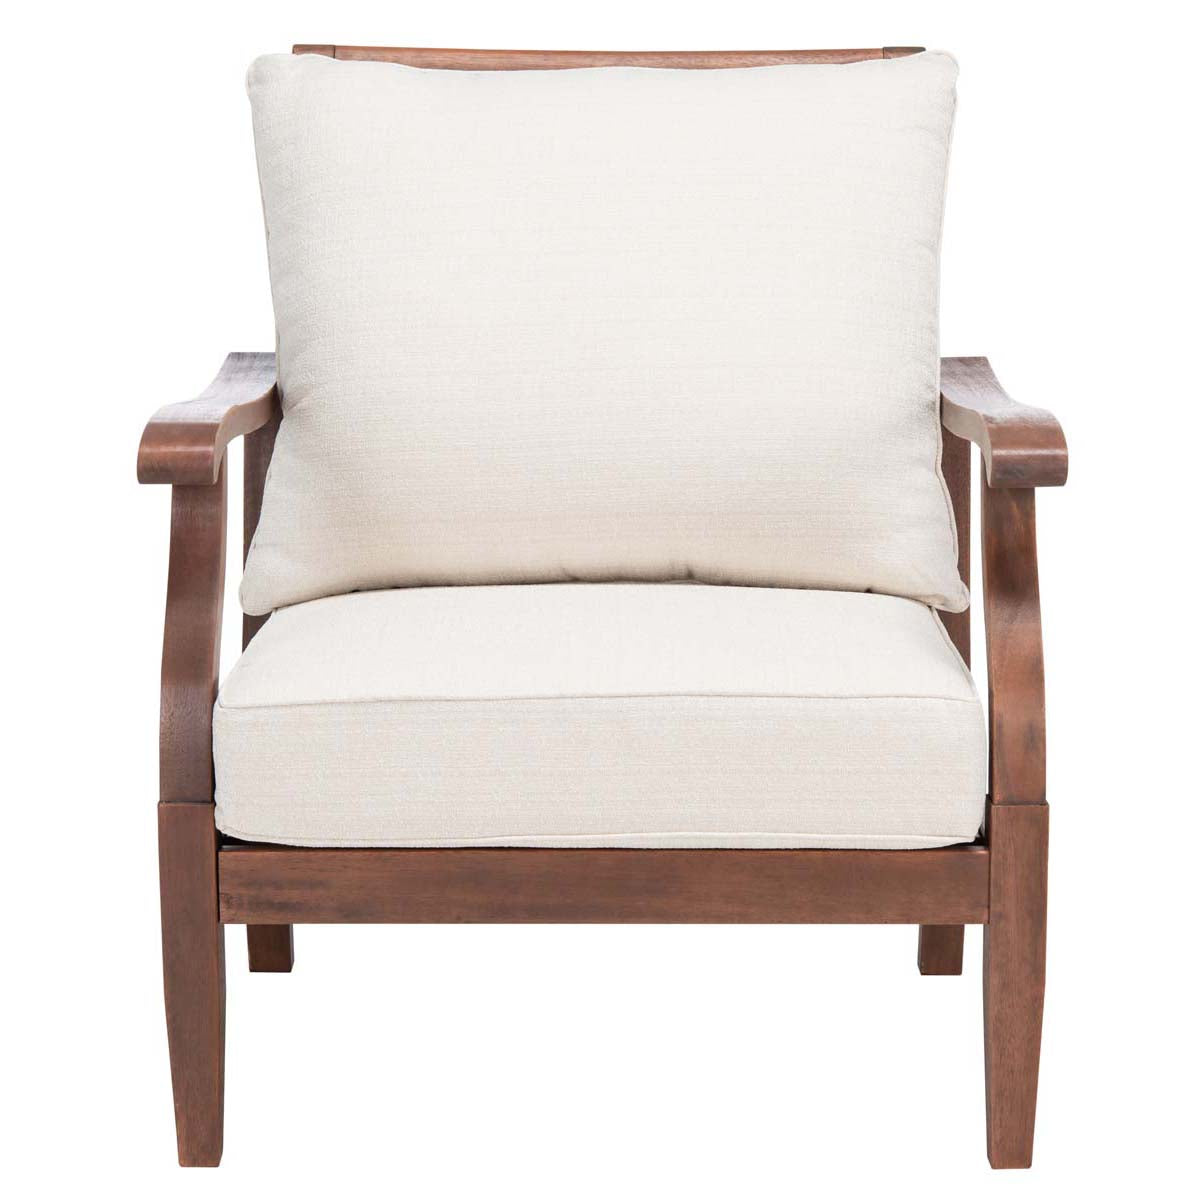 Safavieh Couture Payden Outdoor Accent Chair , CPT1022 - Natural / Beige